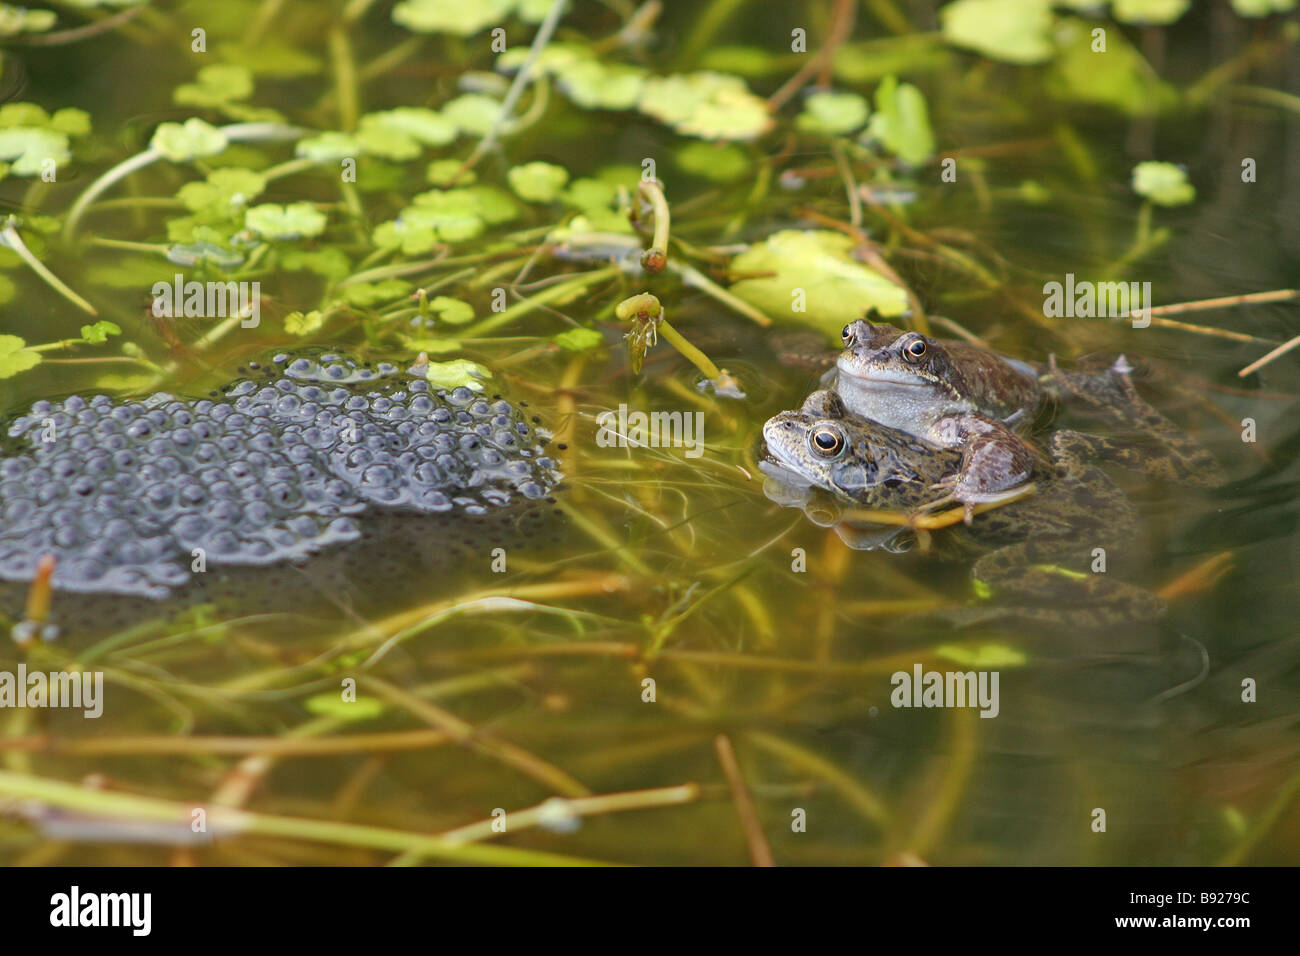 Two frogs near frogspawn Stock Photo